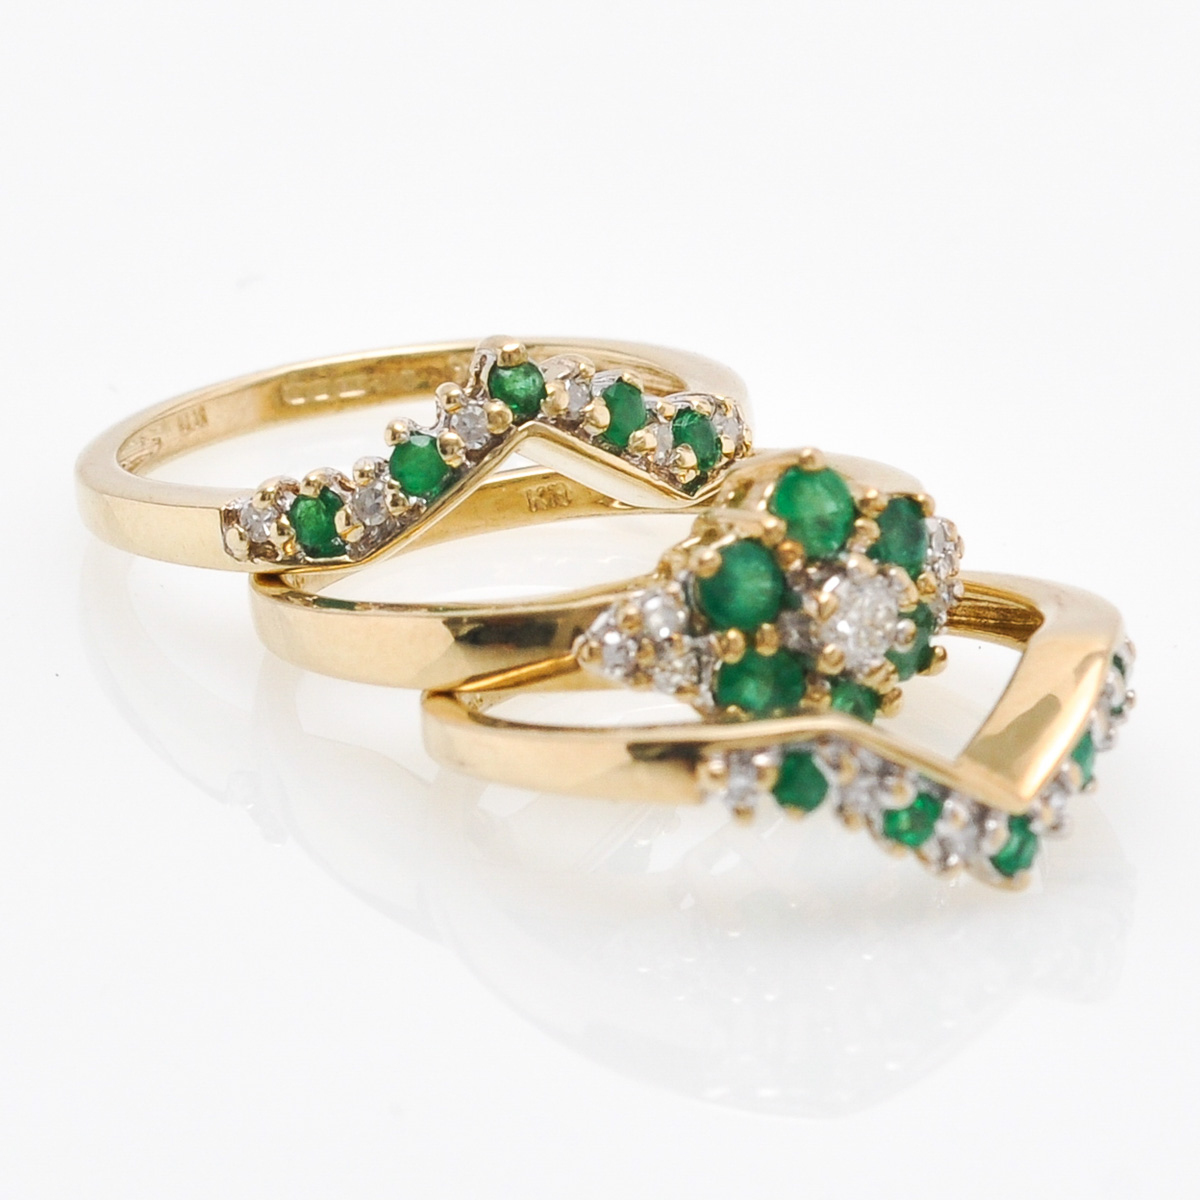 A 9KG Emerald and Diamond Ring with Ring Guard - Image 2 of 4